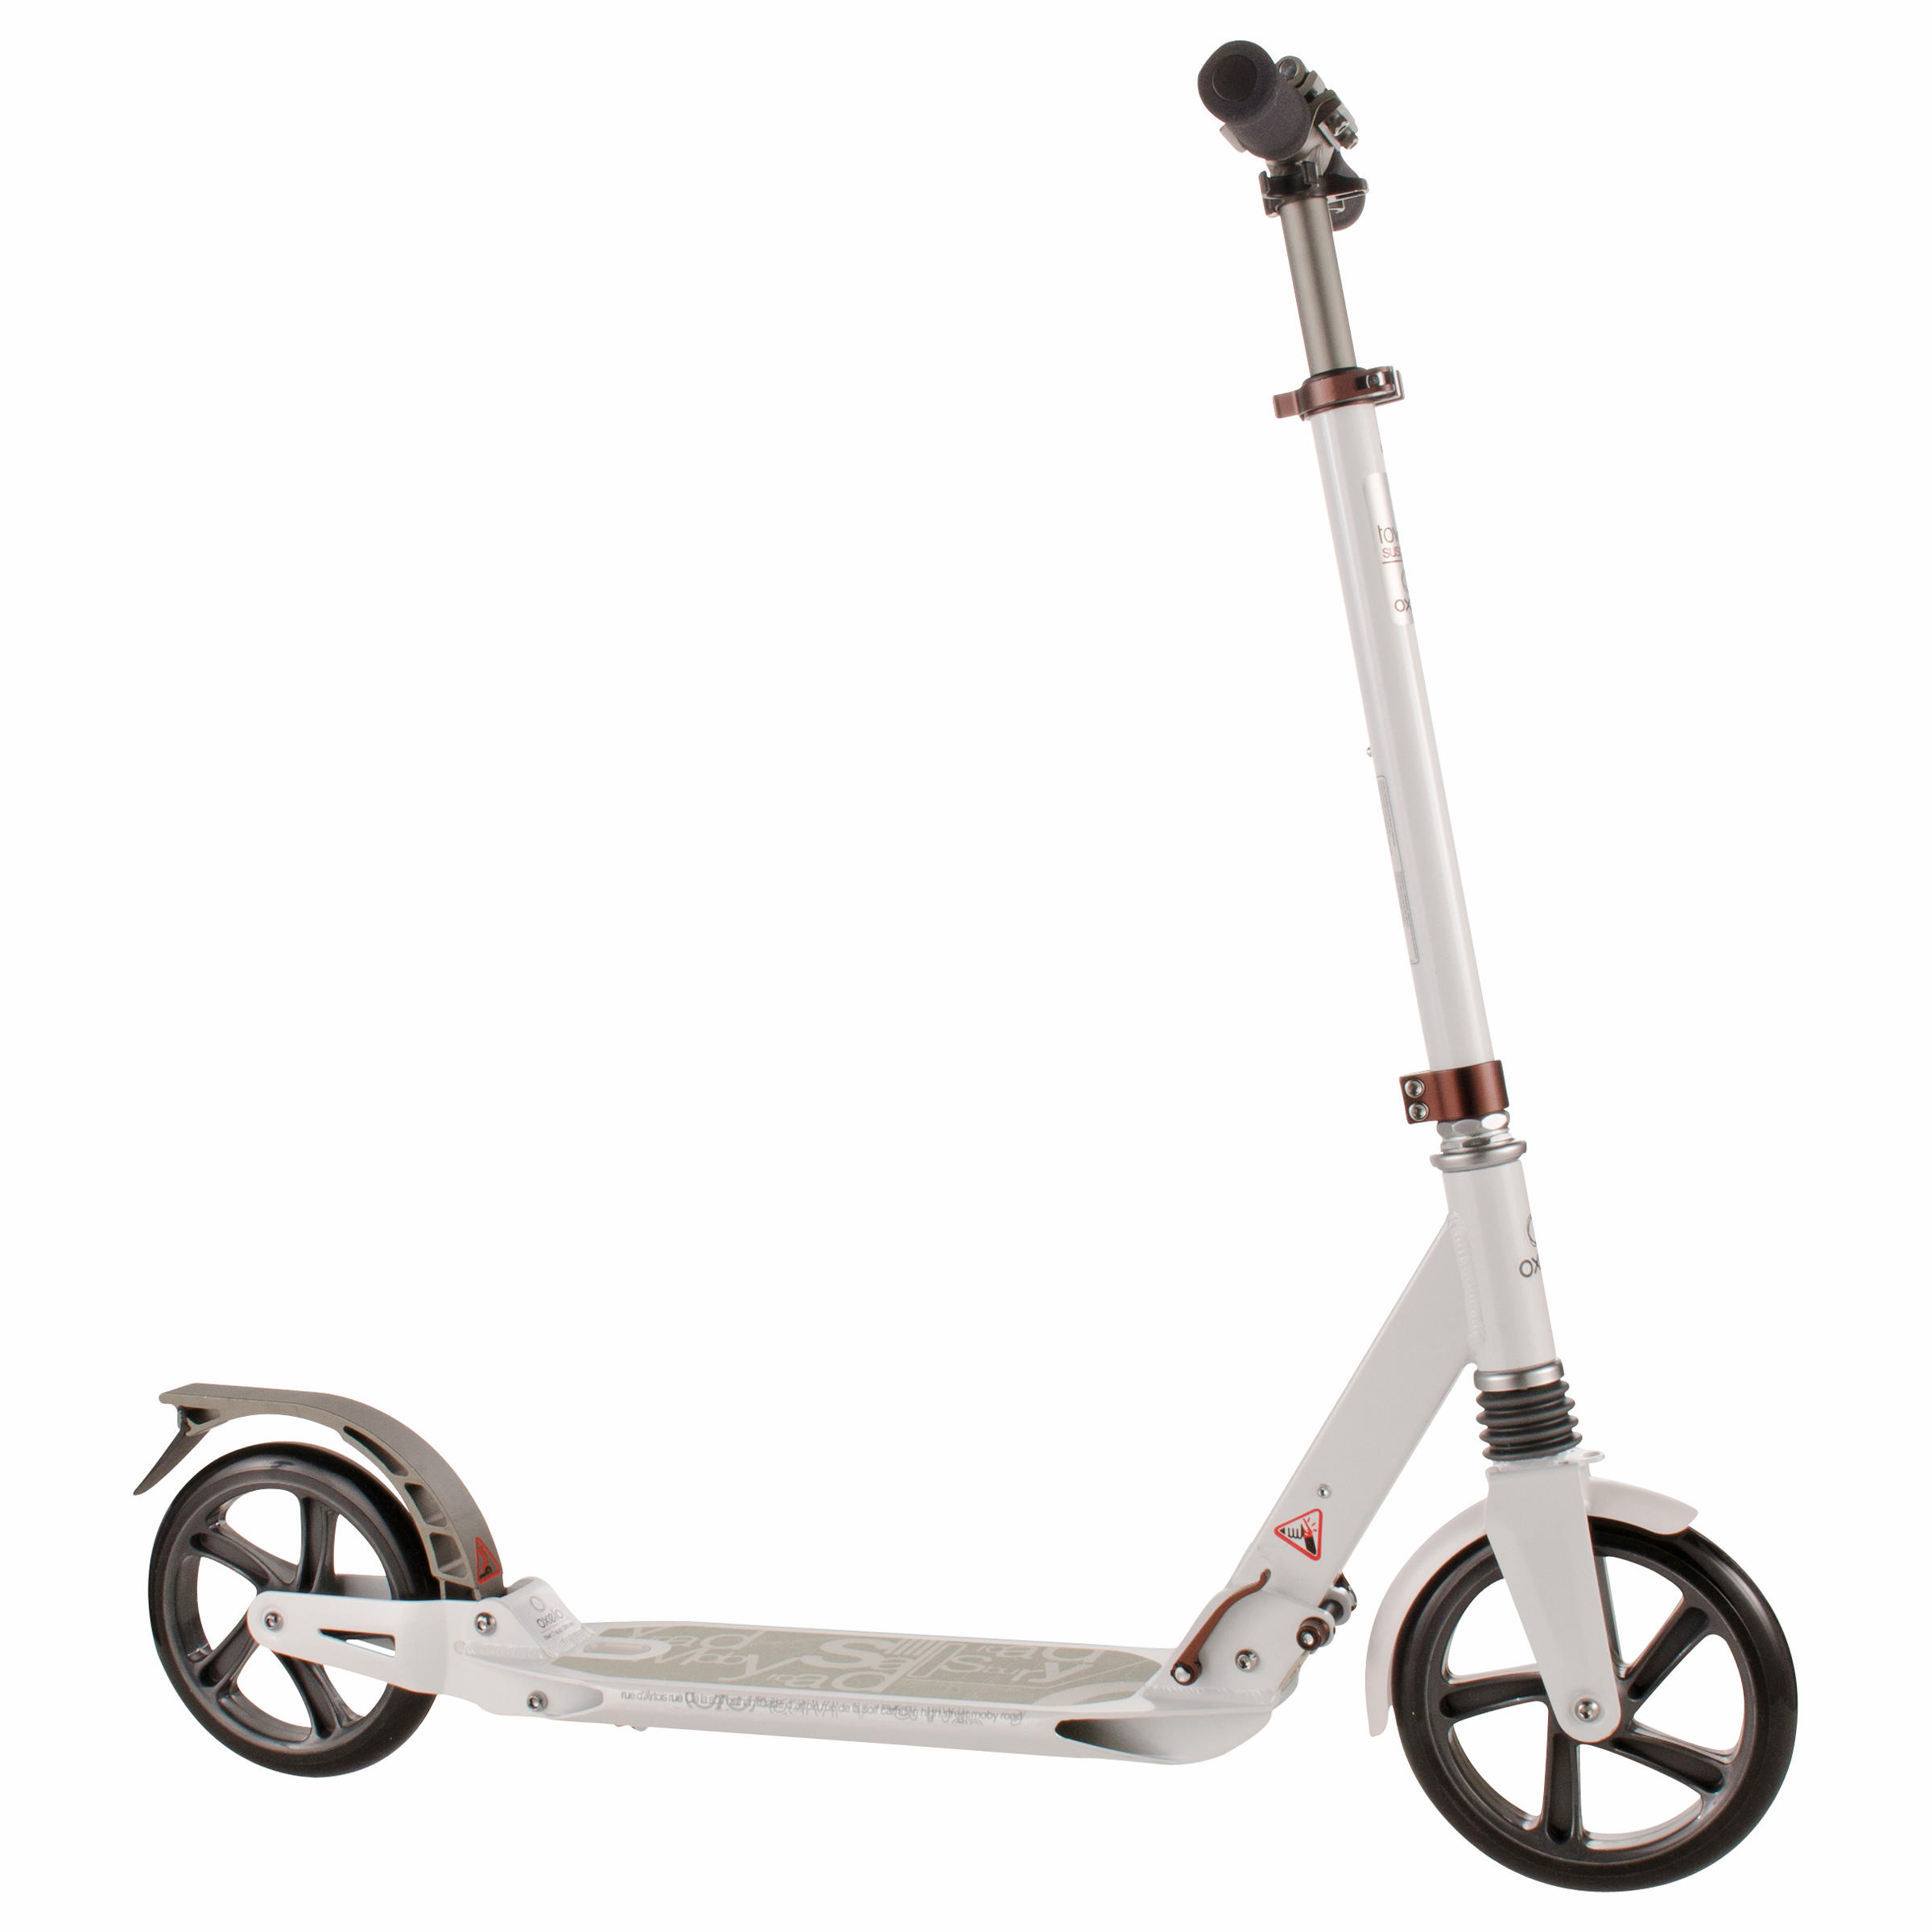 Town 7 XL Adult Scooter - White 1/8